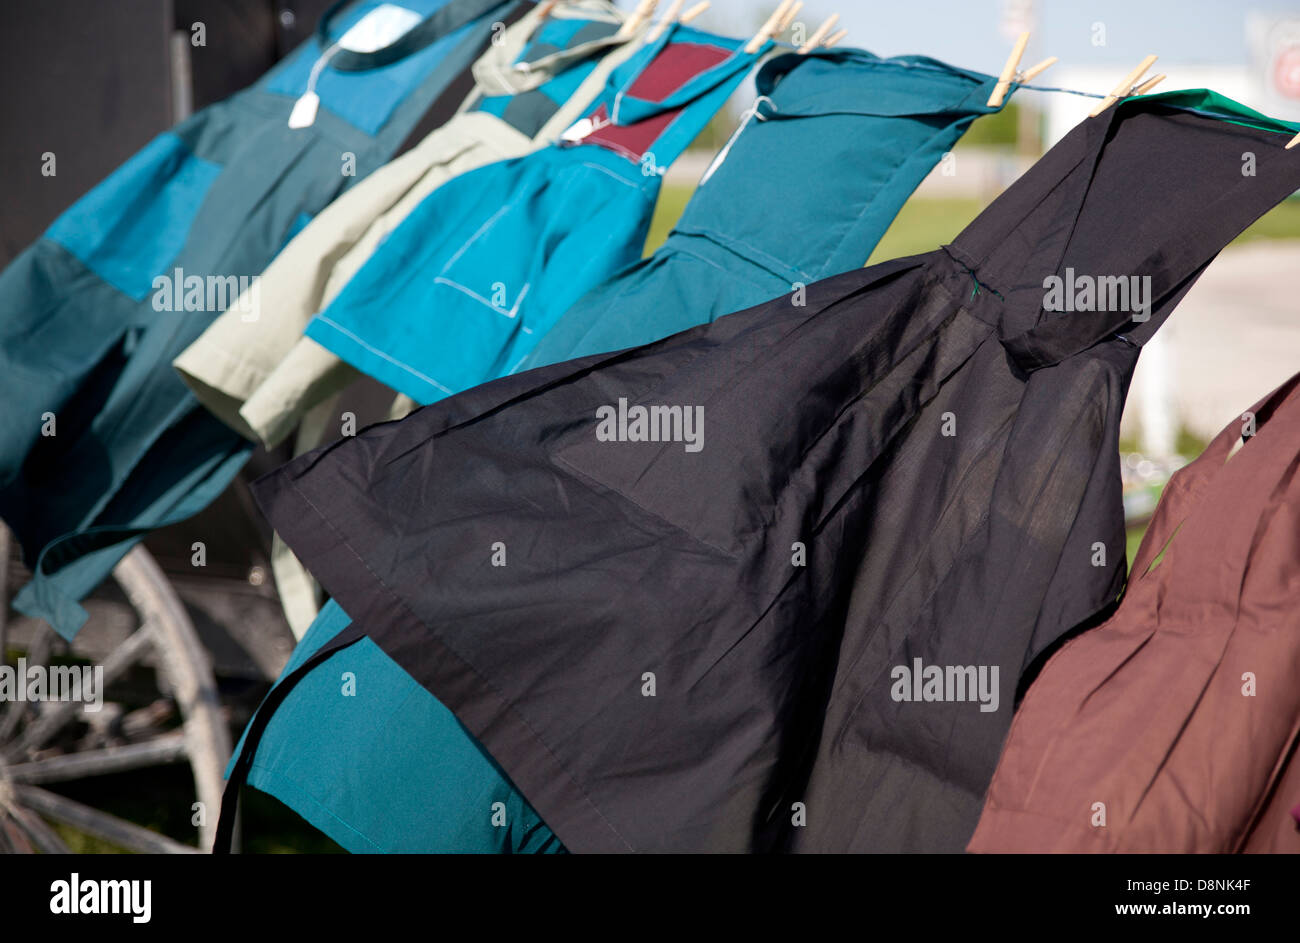 Hand-made aprons crafted by the Amish hang on a clothesline. Stock Photo